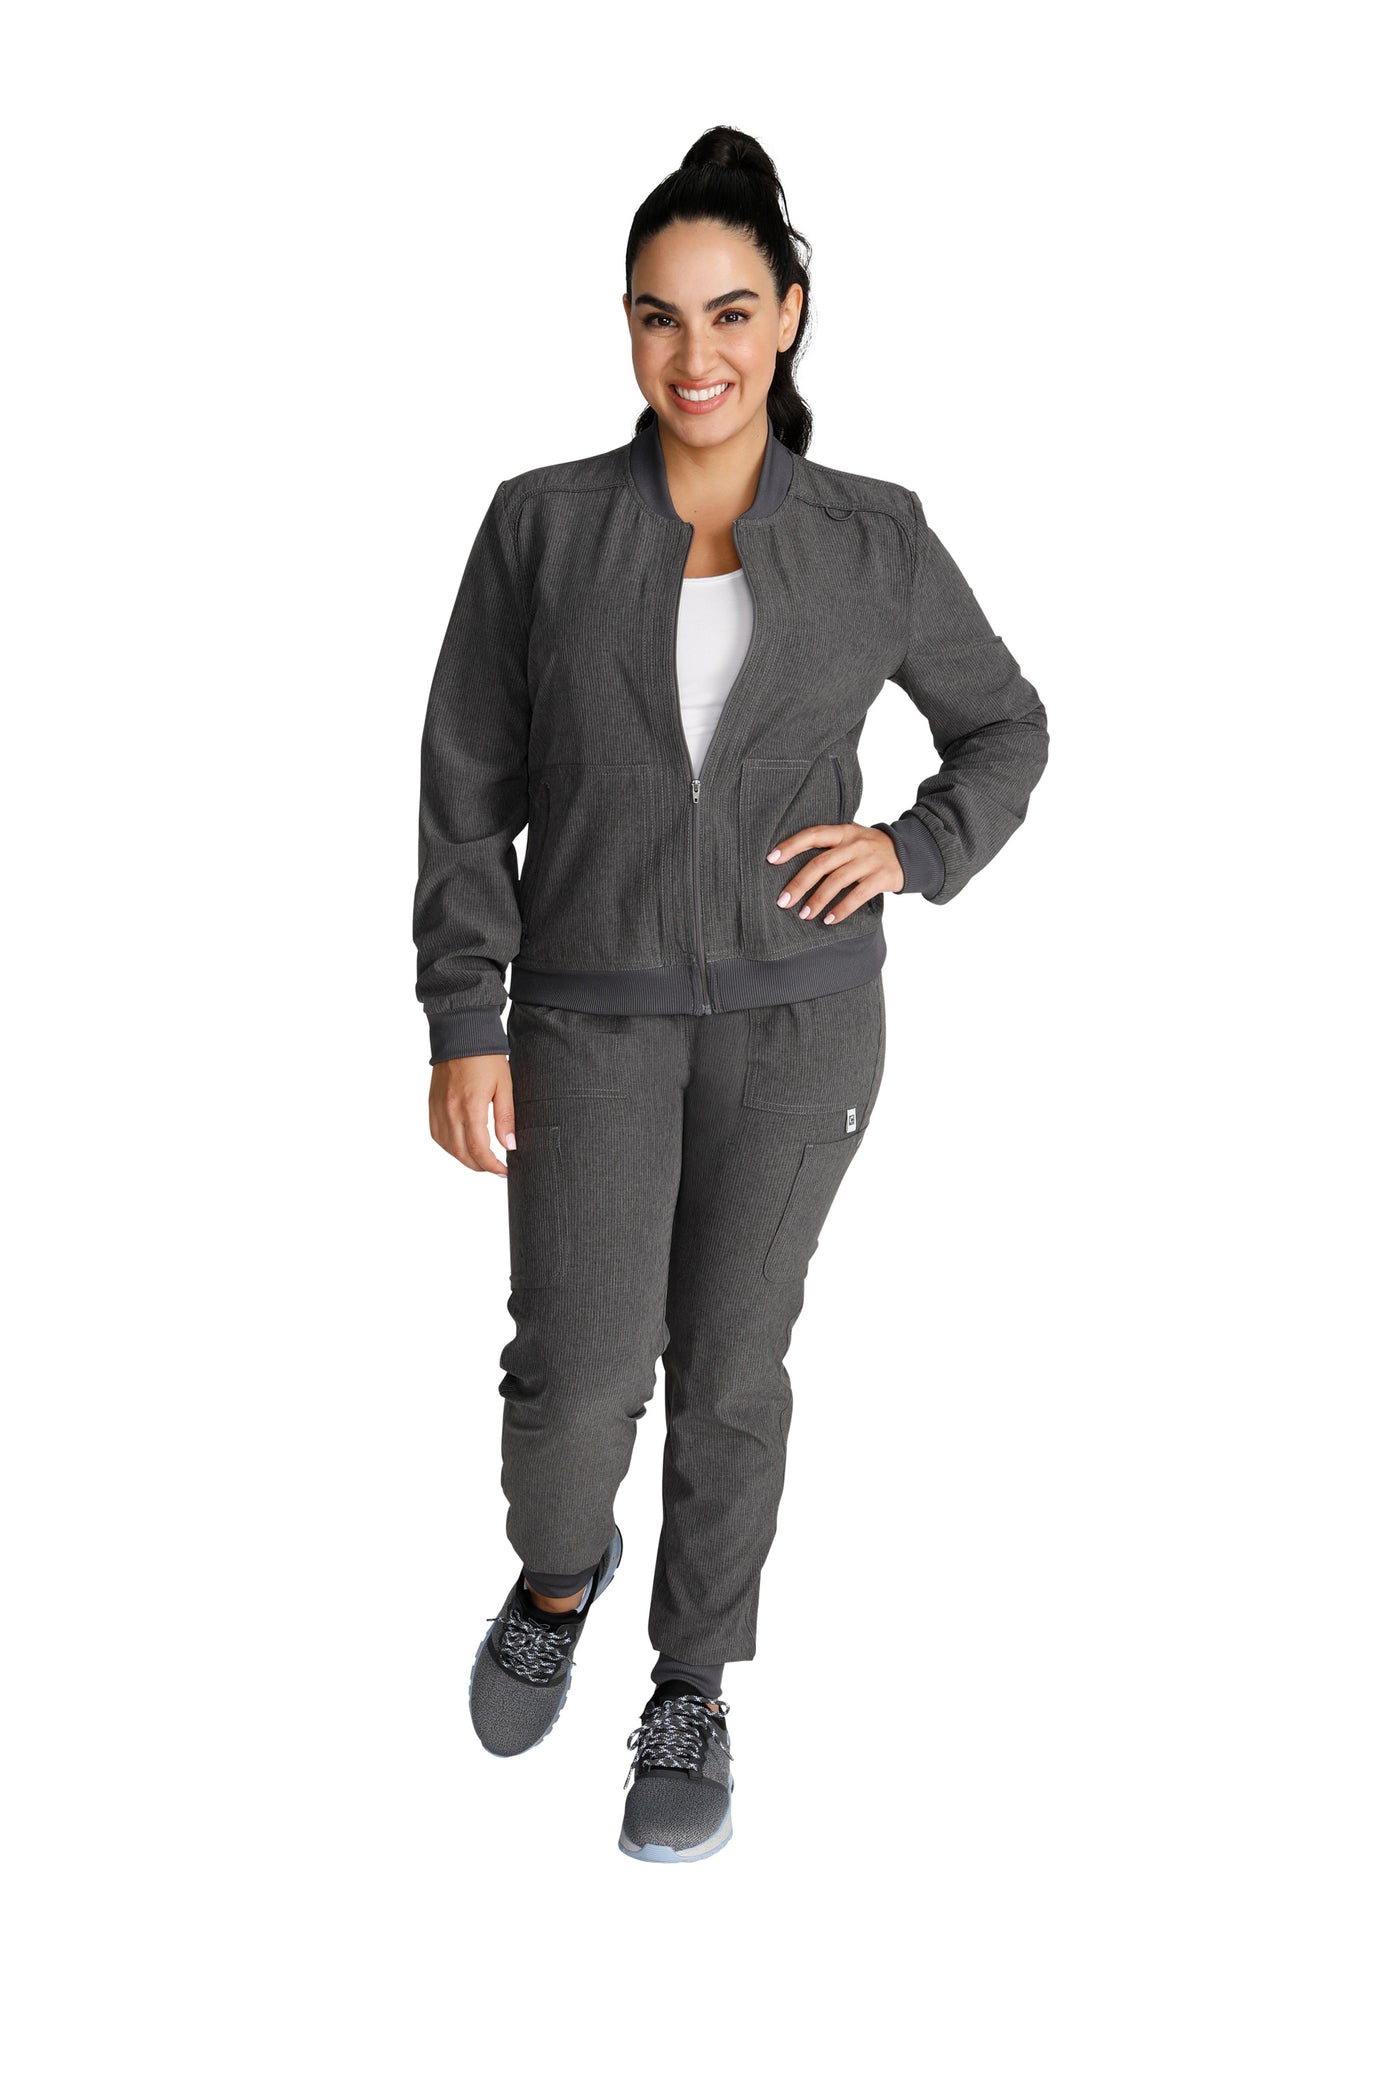 Heather Pewter - Cherokee Collection Zip Front Bomber Jacket